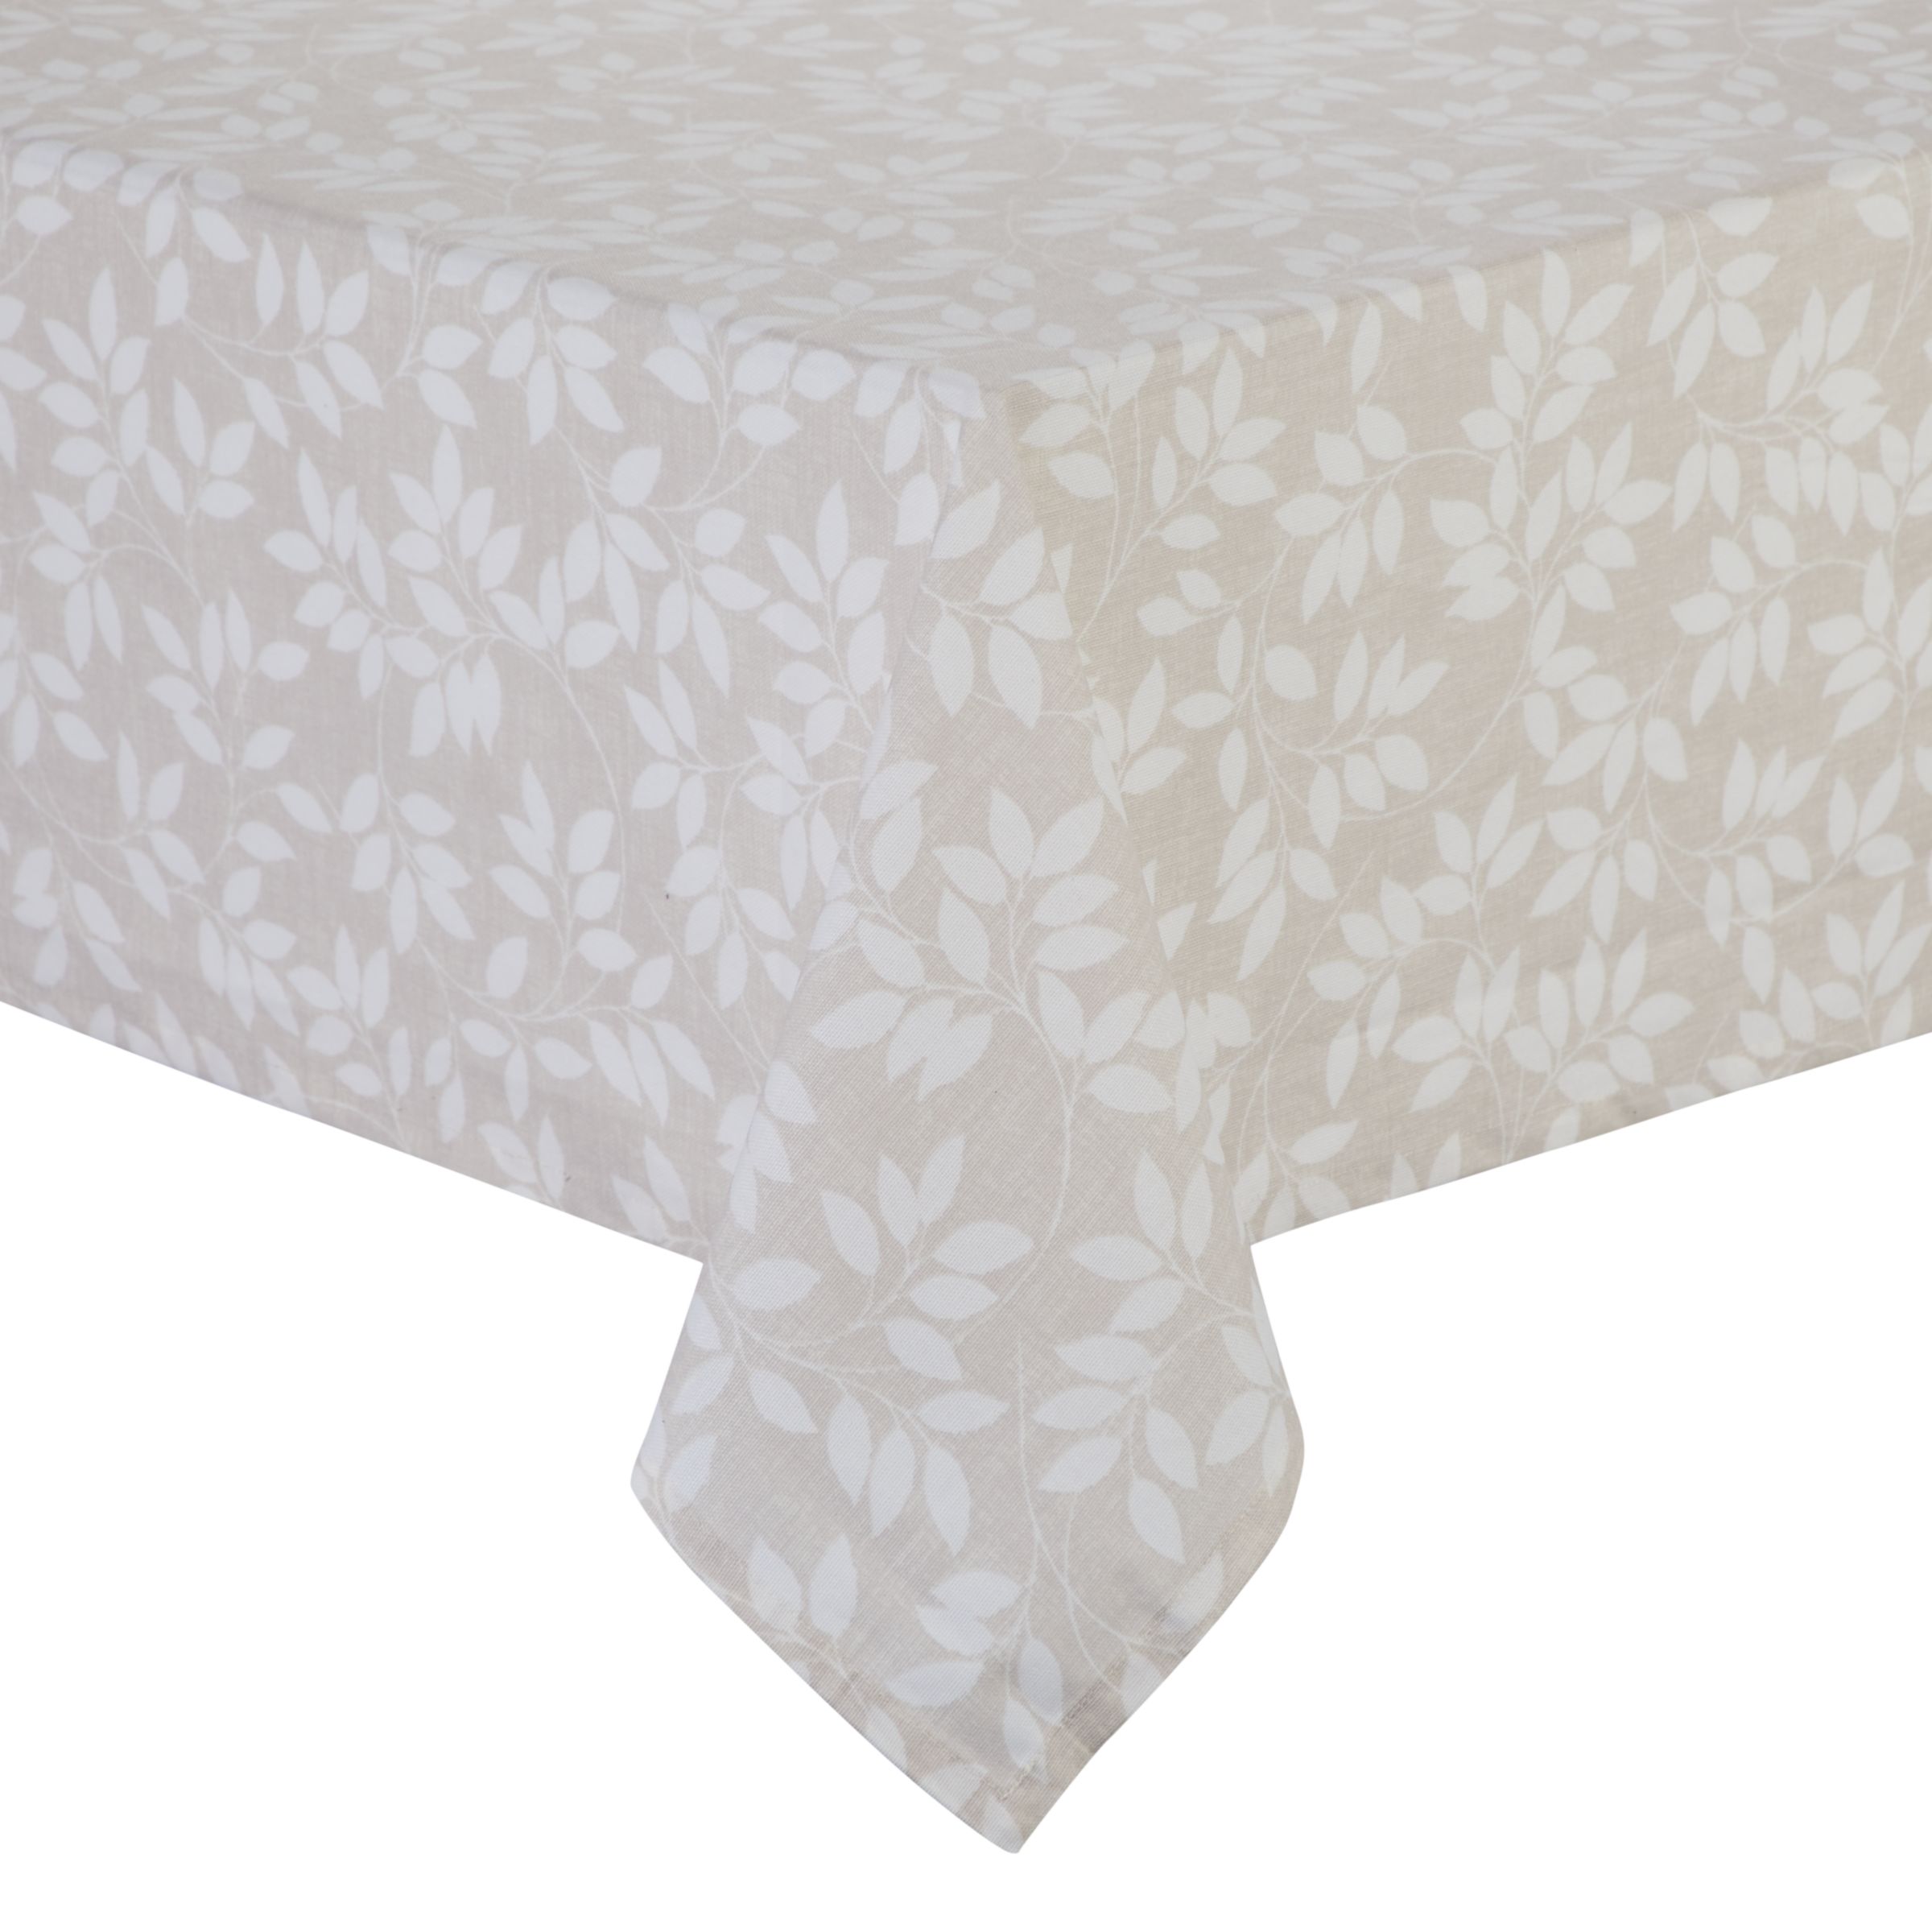 John Lewis Trailing Leaves Wipe Clean Tablecloth Review